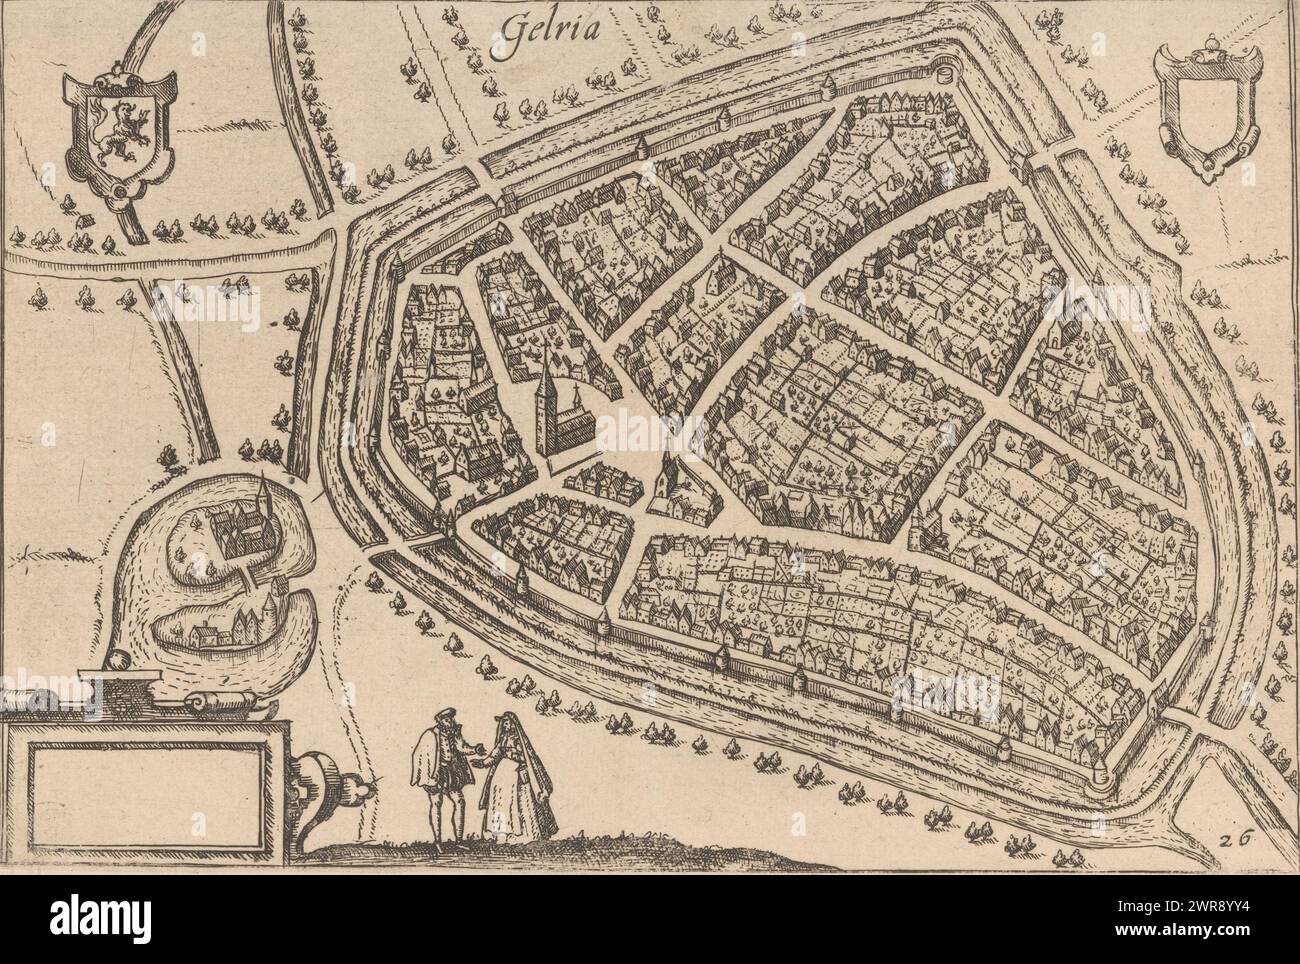 Map of Geldern, Gelria (title on object), Map of Geldern with buildings in a bird's eye view. Bottom left an empty cartouche. Top left the coat of arms of Gelre, top right an empty coat of arms. Numbered bottom right: 26., print maker: anonymous, publisher: Willem Janszoon Blaeu, publisher: Johannes Janssonius, Amsterdam, 1612 - 1648, paper, etching, engraving, height 161 mm × width 244 mm, print Stock Photo